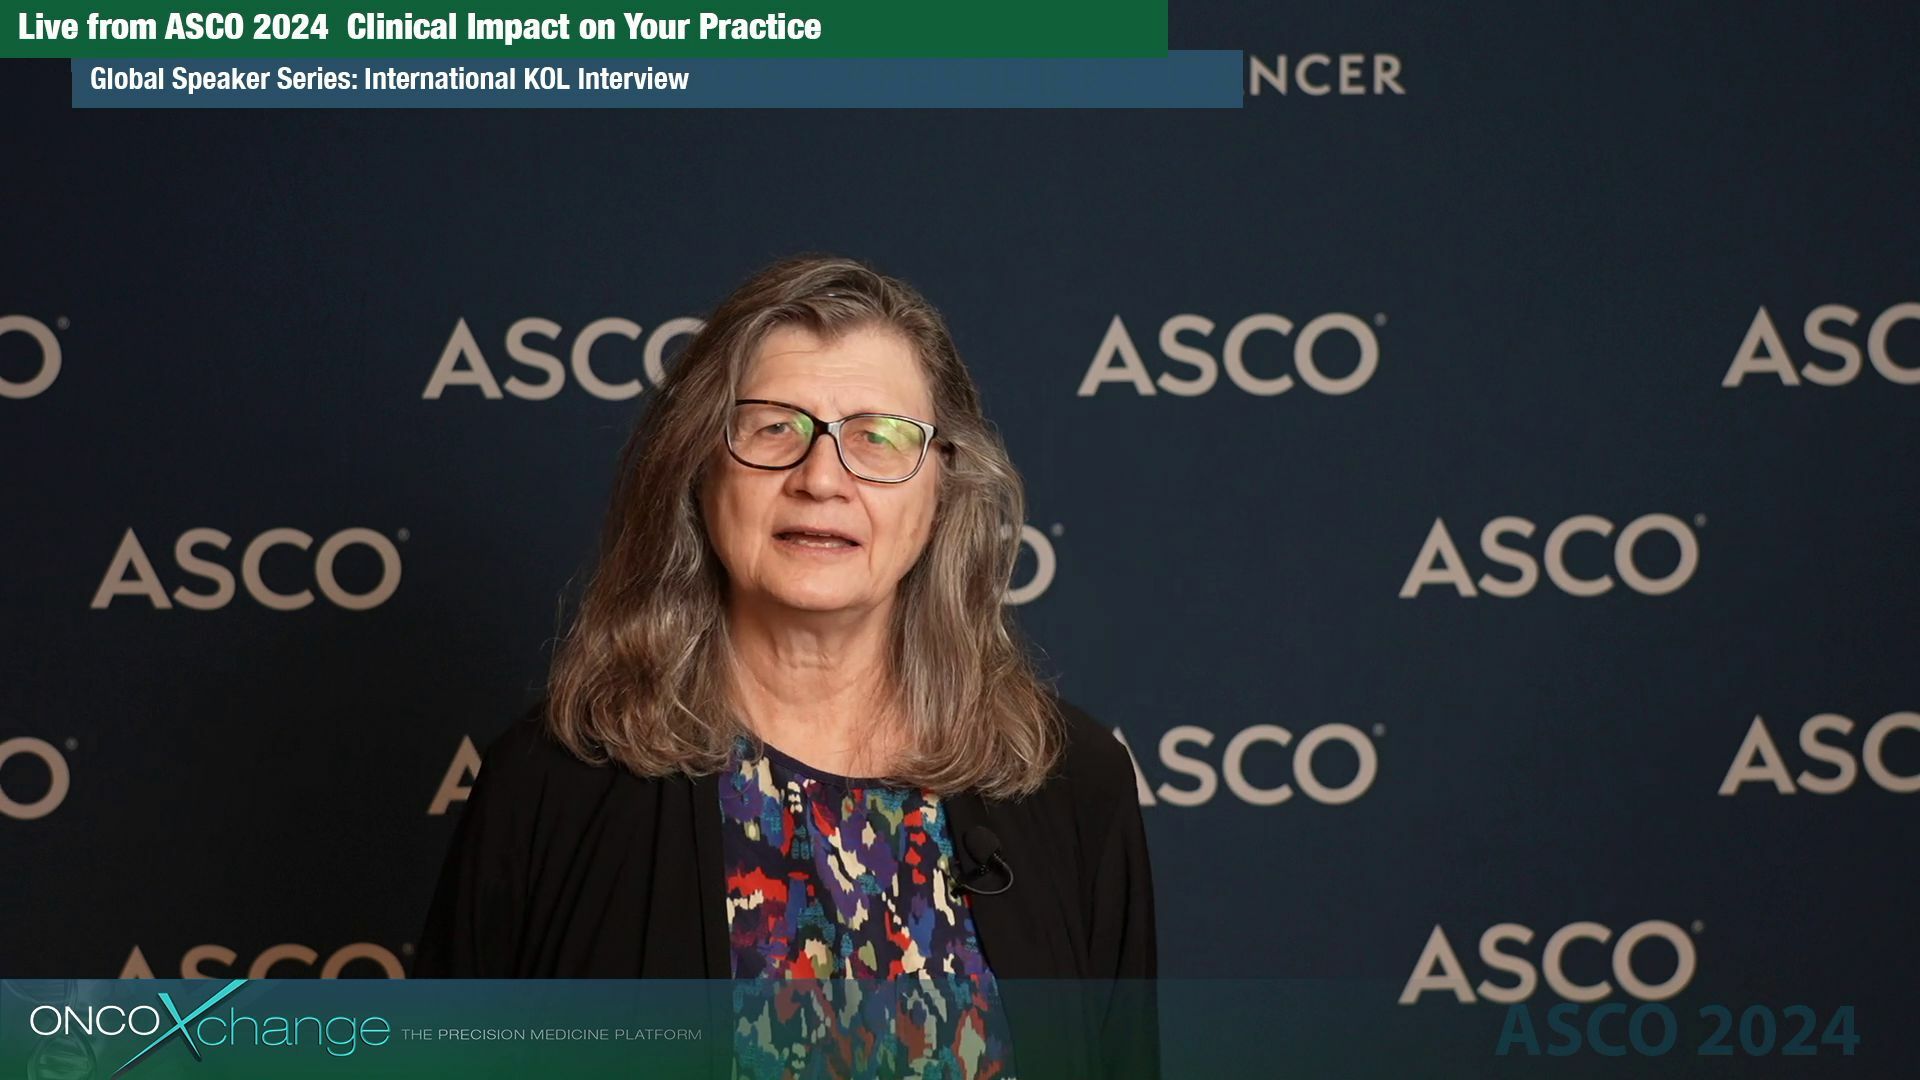 ASCO 2024 - Global Speaker Series - Advancements in AI for Breast Cancer Imaging with Dr. Maryellen Giger